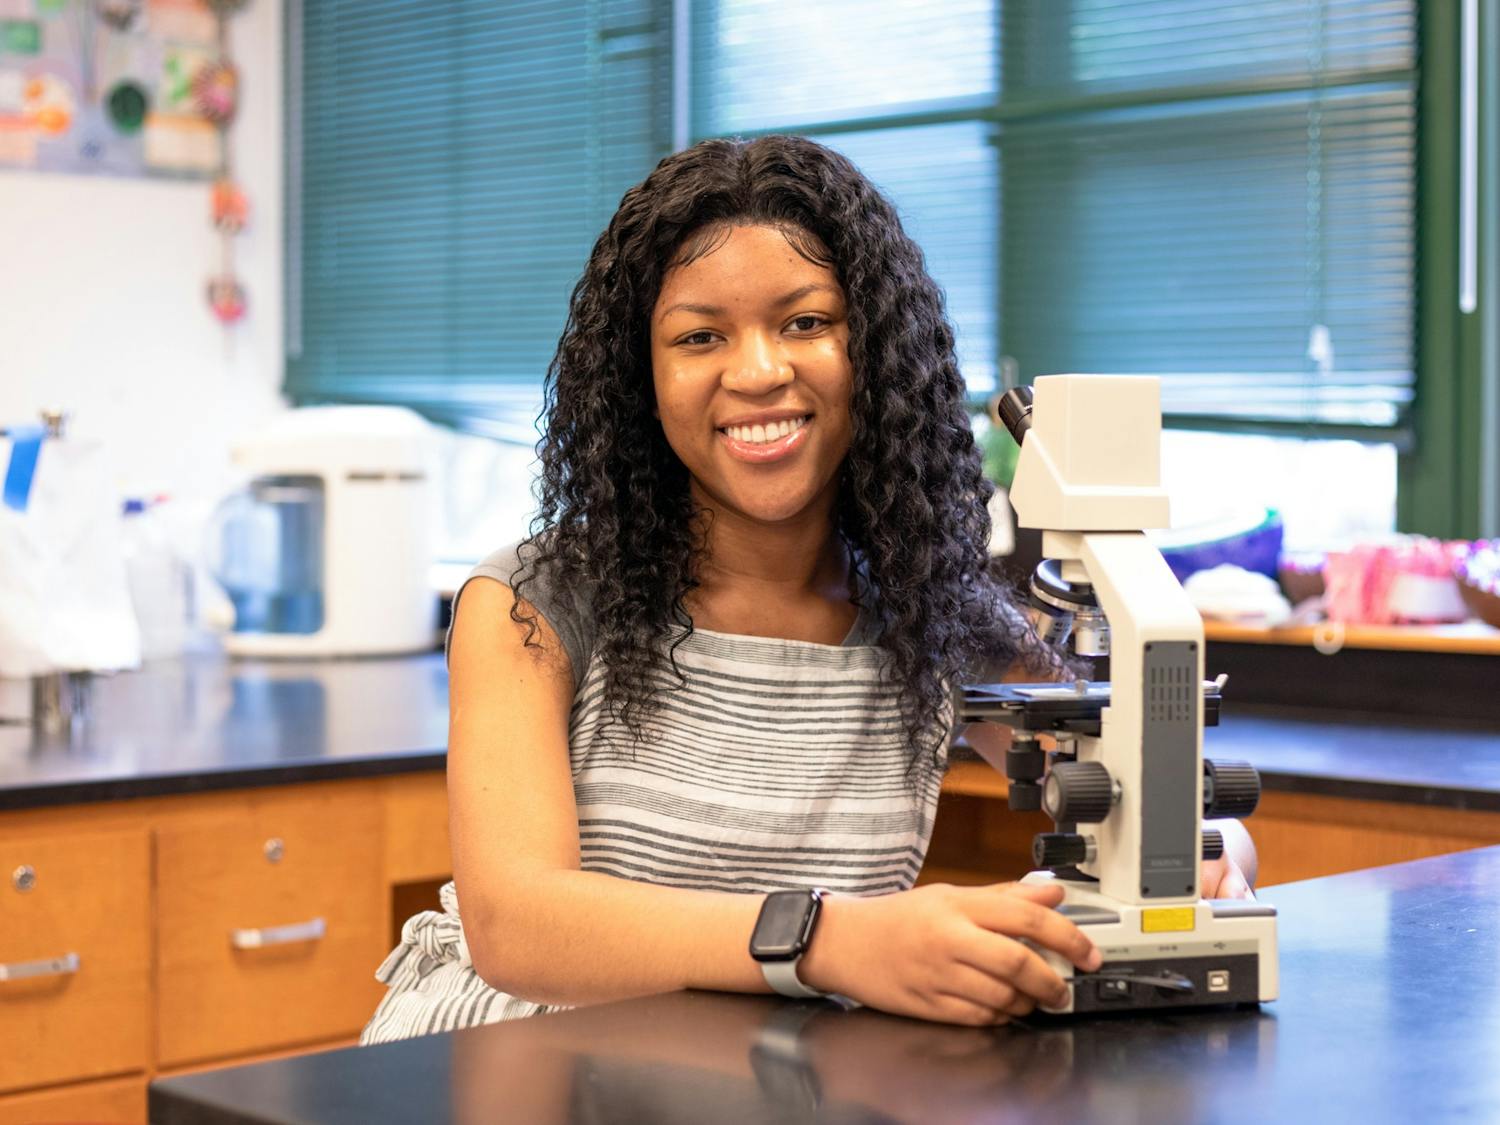 Pristine Onuoha, an 11th-grade student at East Chapel Hill High School, poses for a portrait at East Chapel Hill High School on May 24, 2022. Onuoha is one of five national finalists in the Genes in Space challenge.